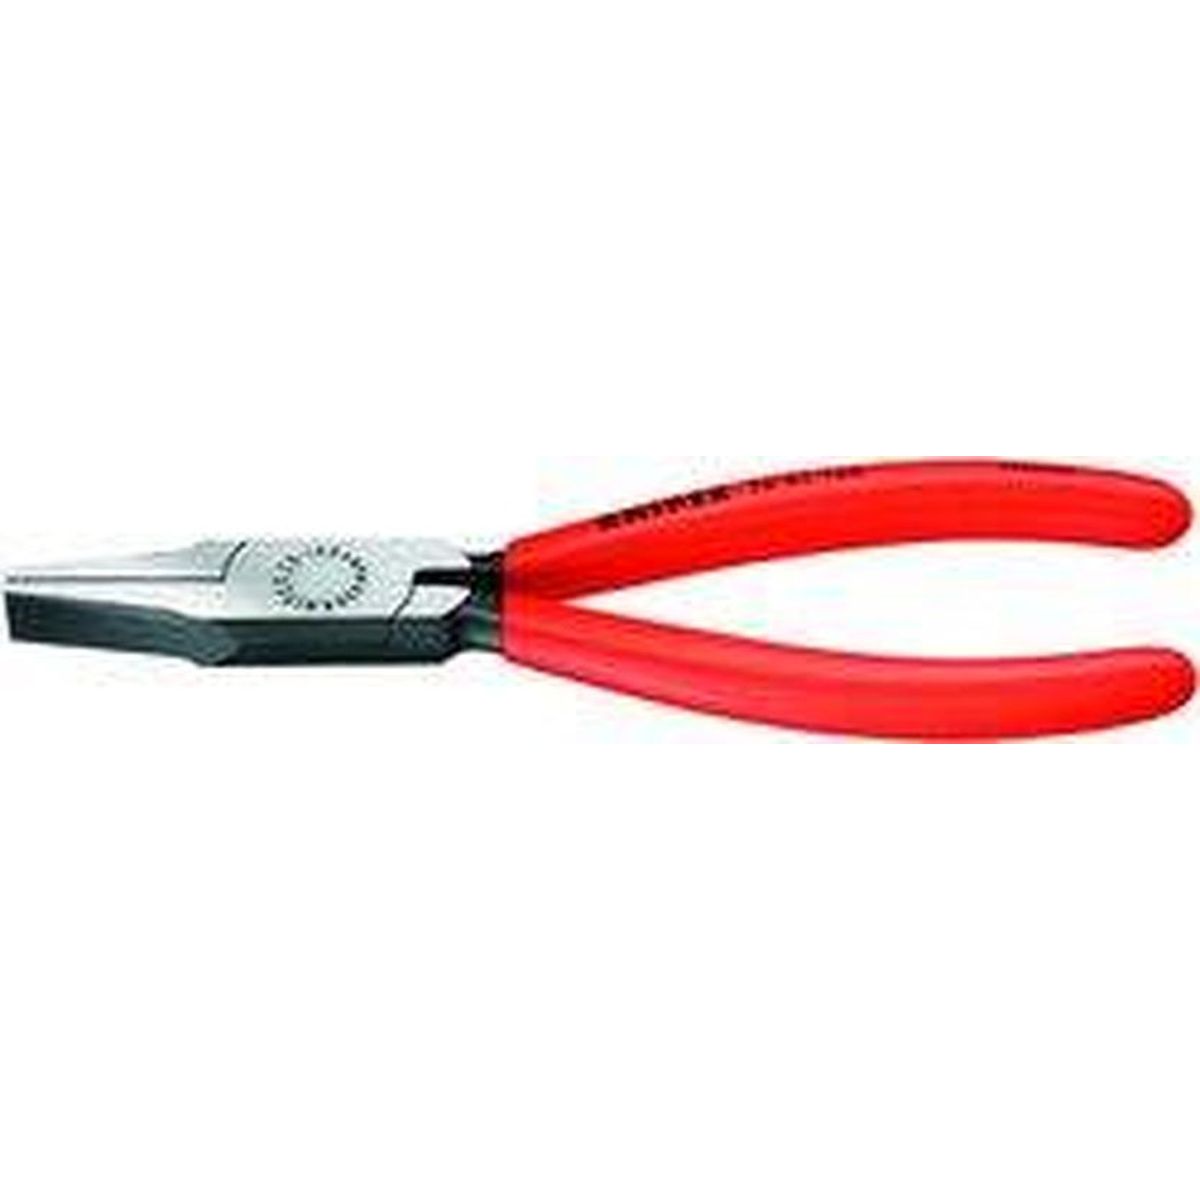 FLAT NOSE PLIERS 2001 180mm Knipex